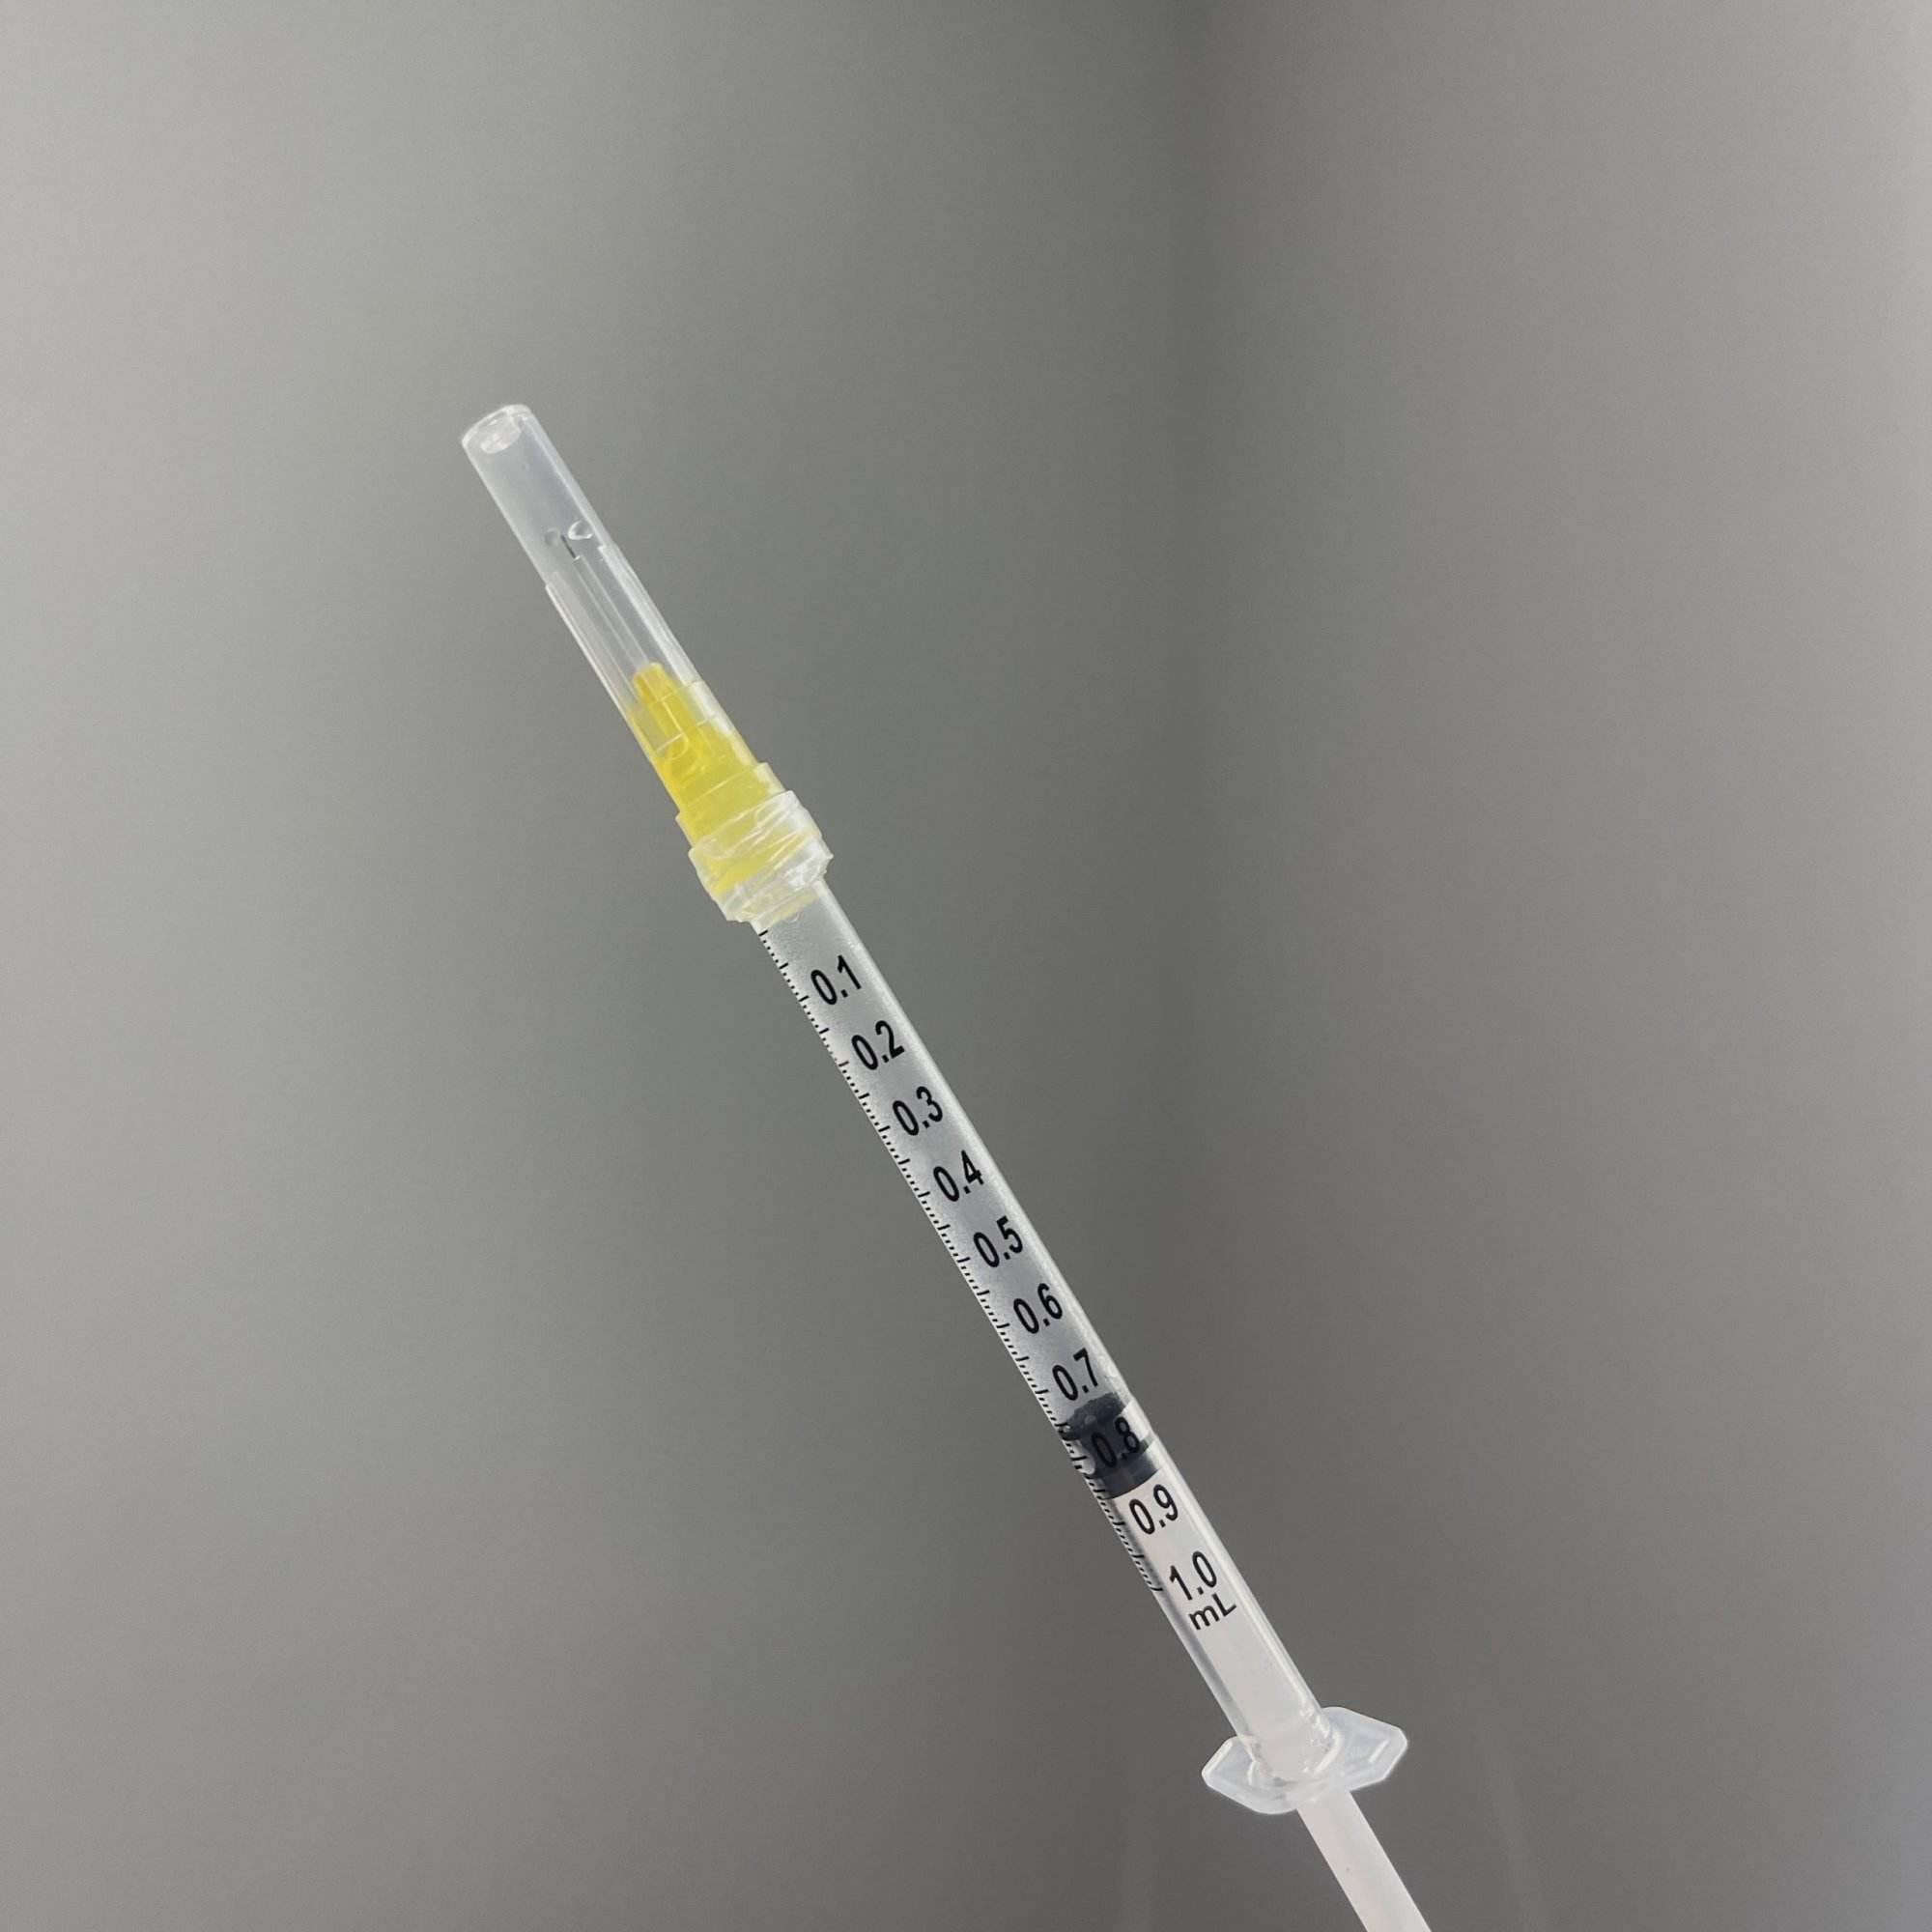 HCG injection needle with cap on